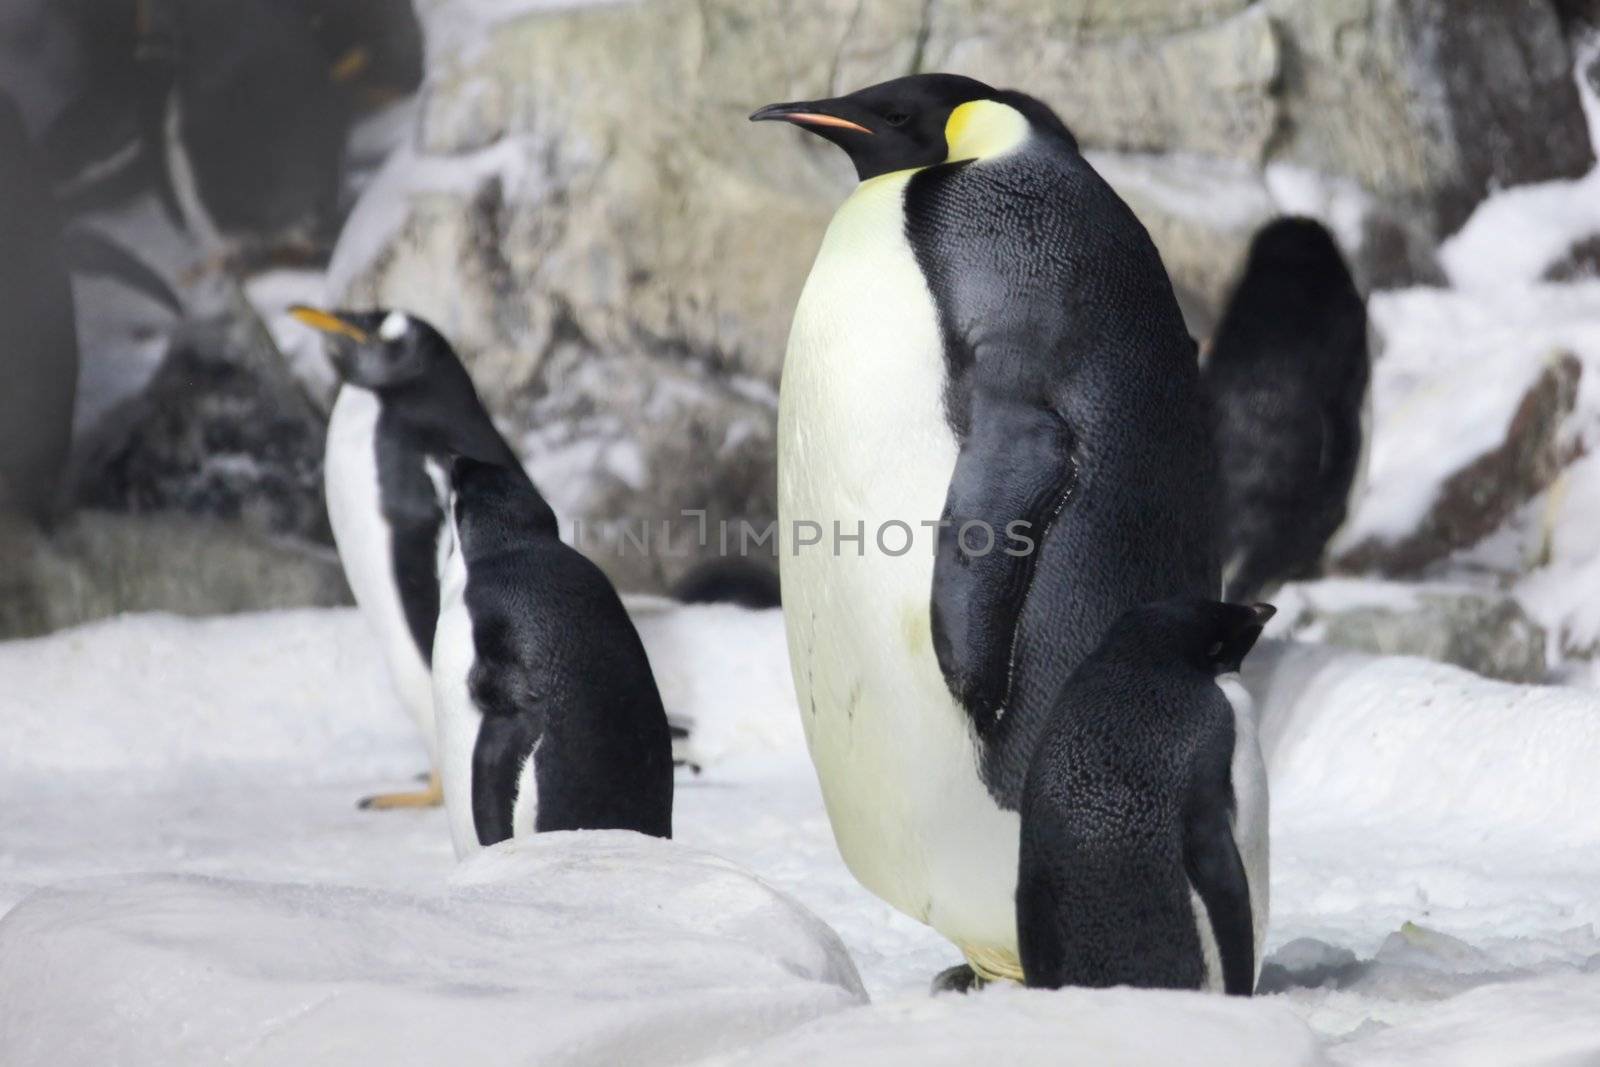 Emperor Penguin Looking On- Note Shot in High ISO Due to Low Light Conditions